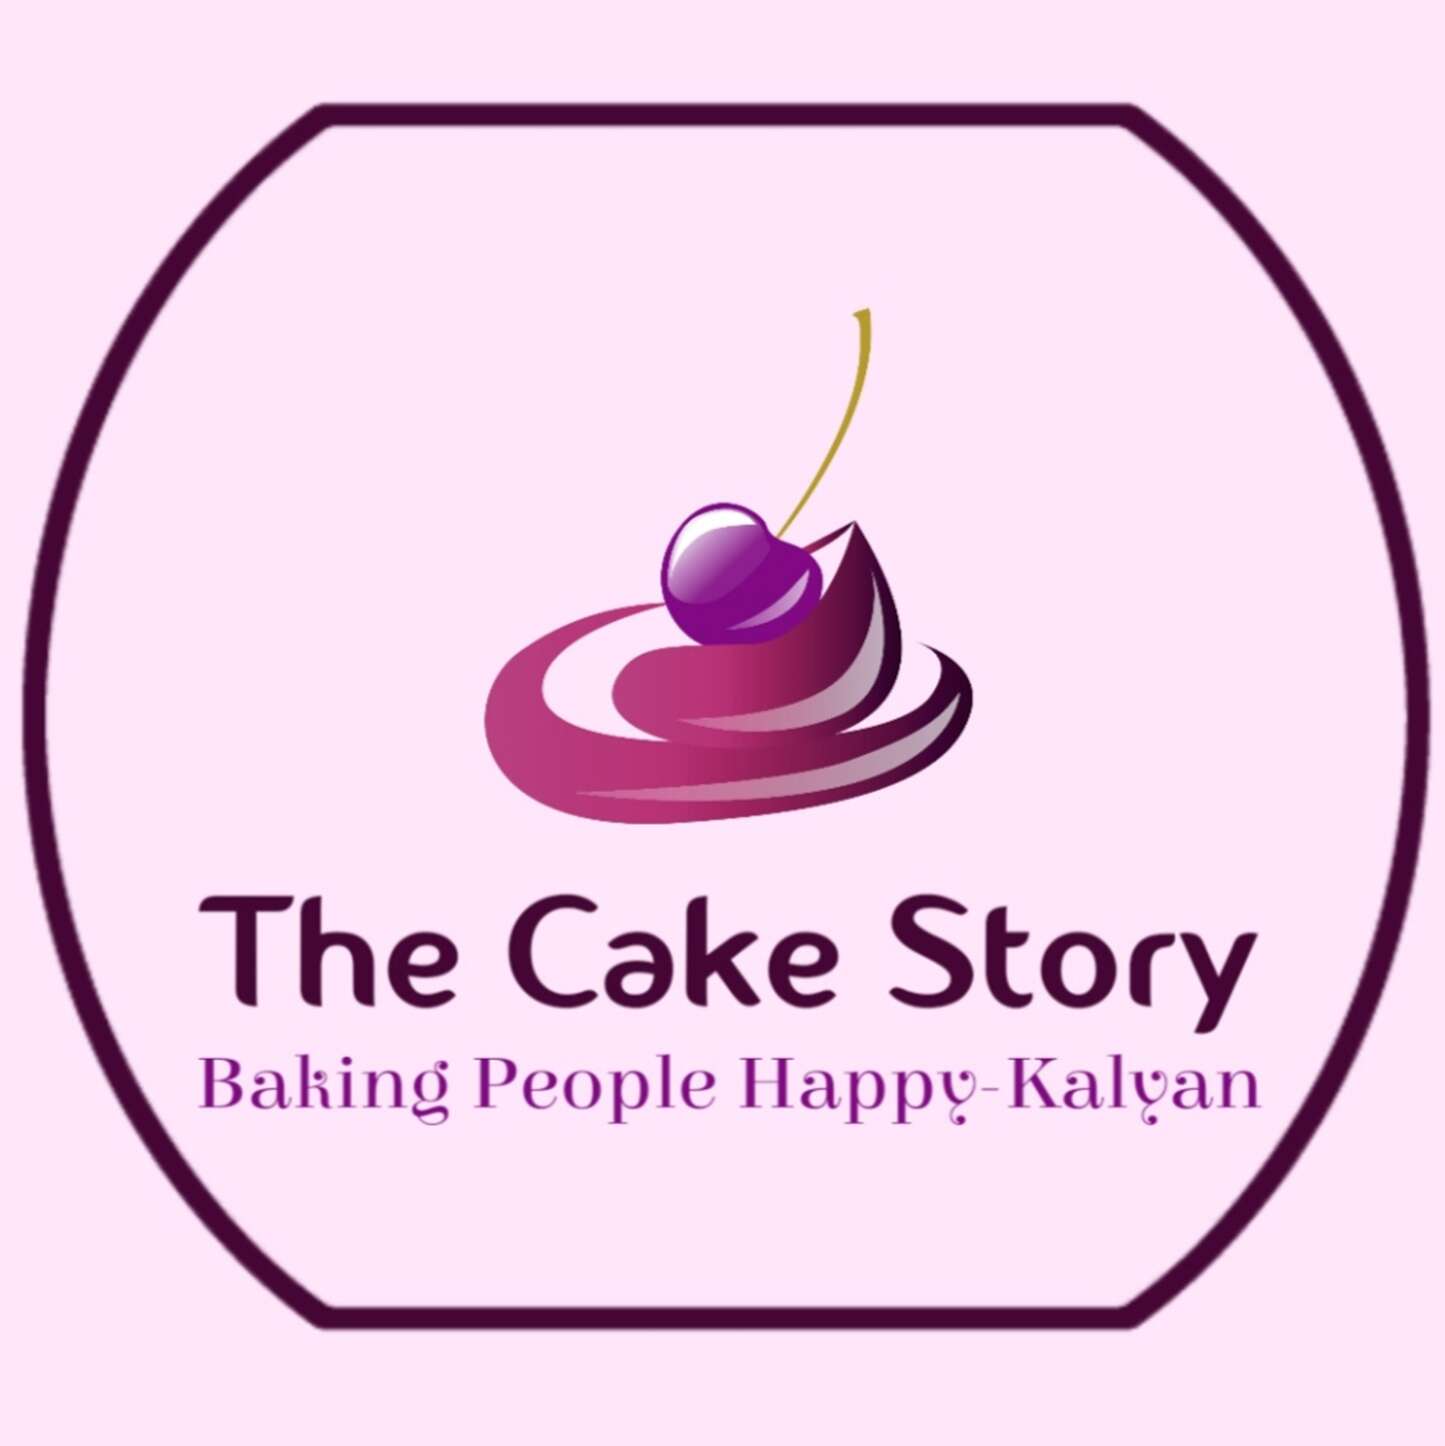 Stay-at-home mom turned cake baker – SheKnows